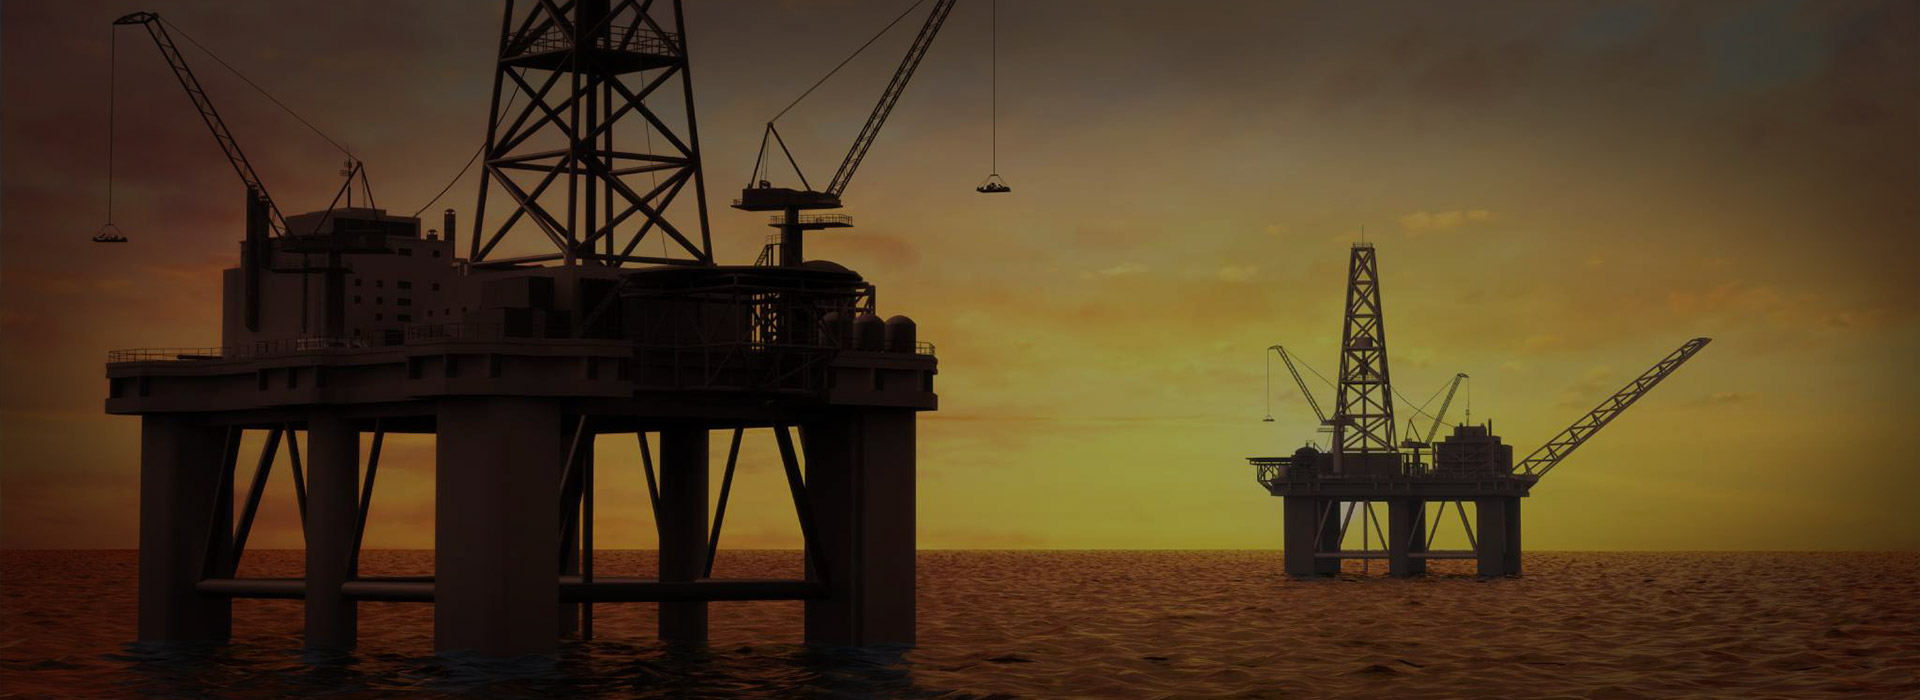 Integrity Upgrade of Offshore Platforms